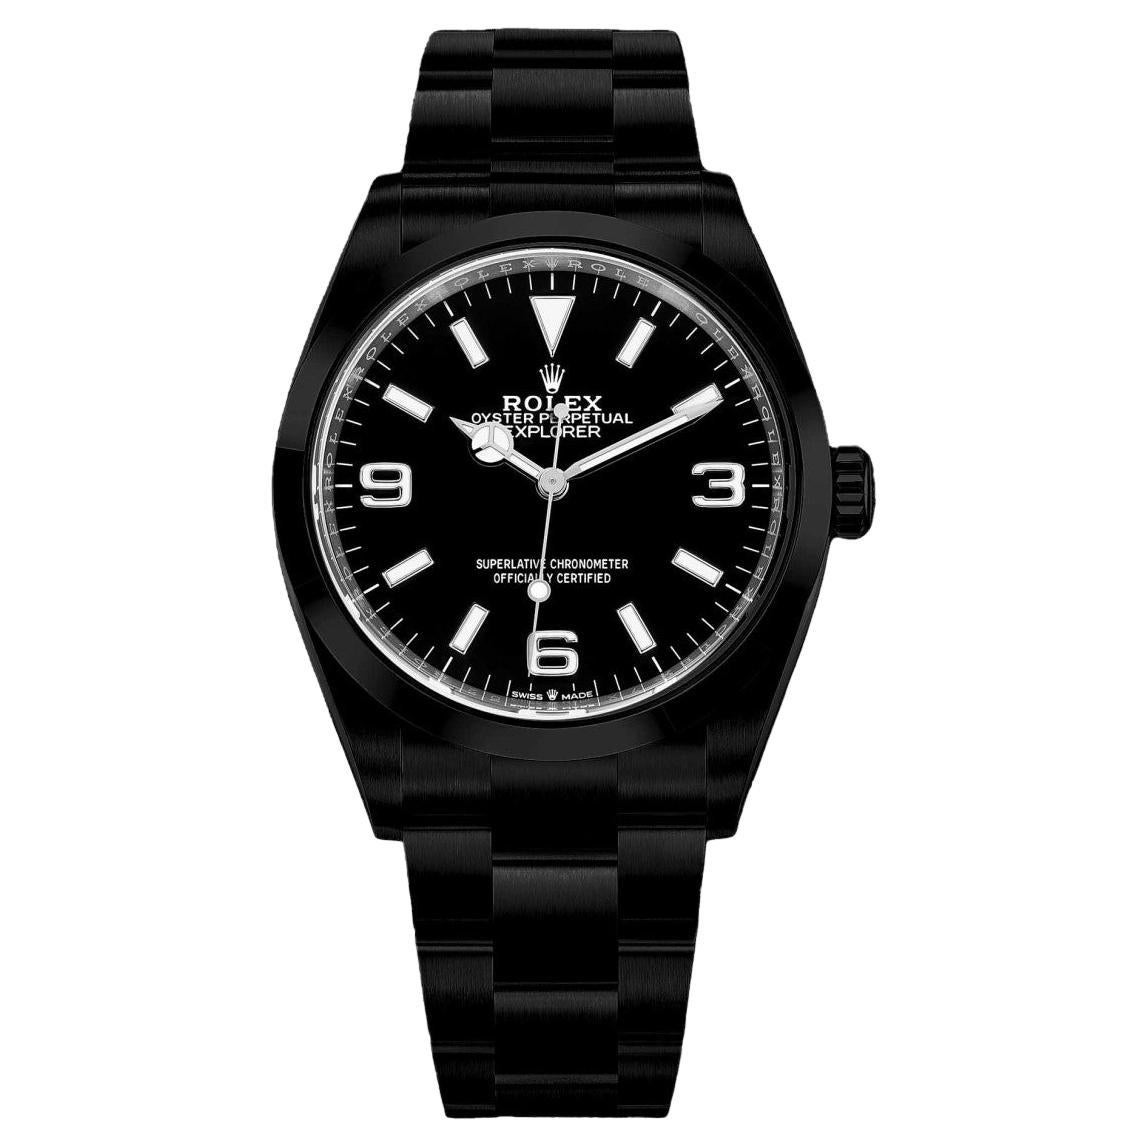 Rolex Explorer 214270 Black PVD/DLC Coated Stainless Steel Watch For Sale